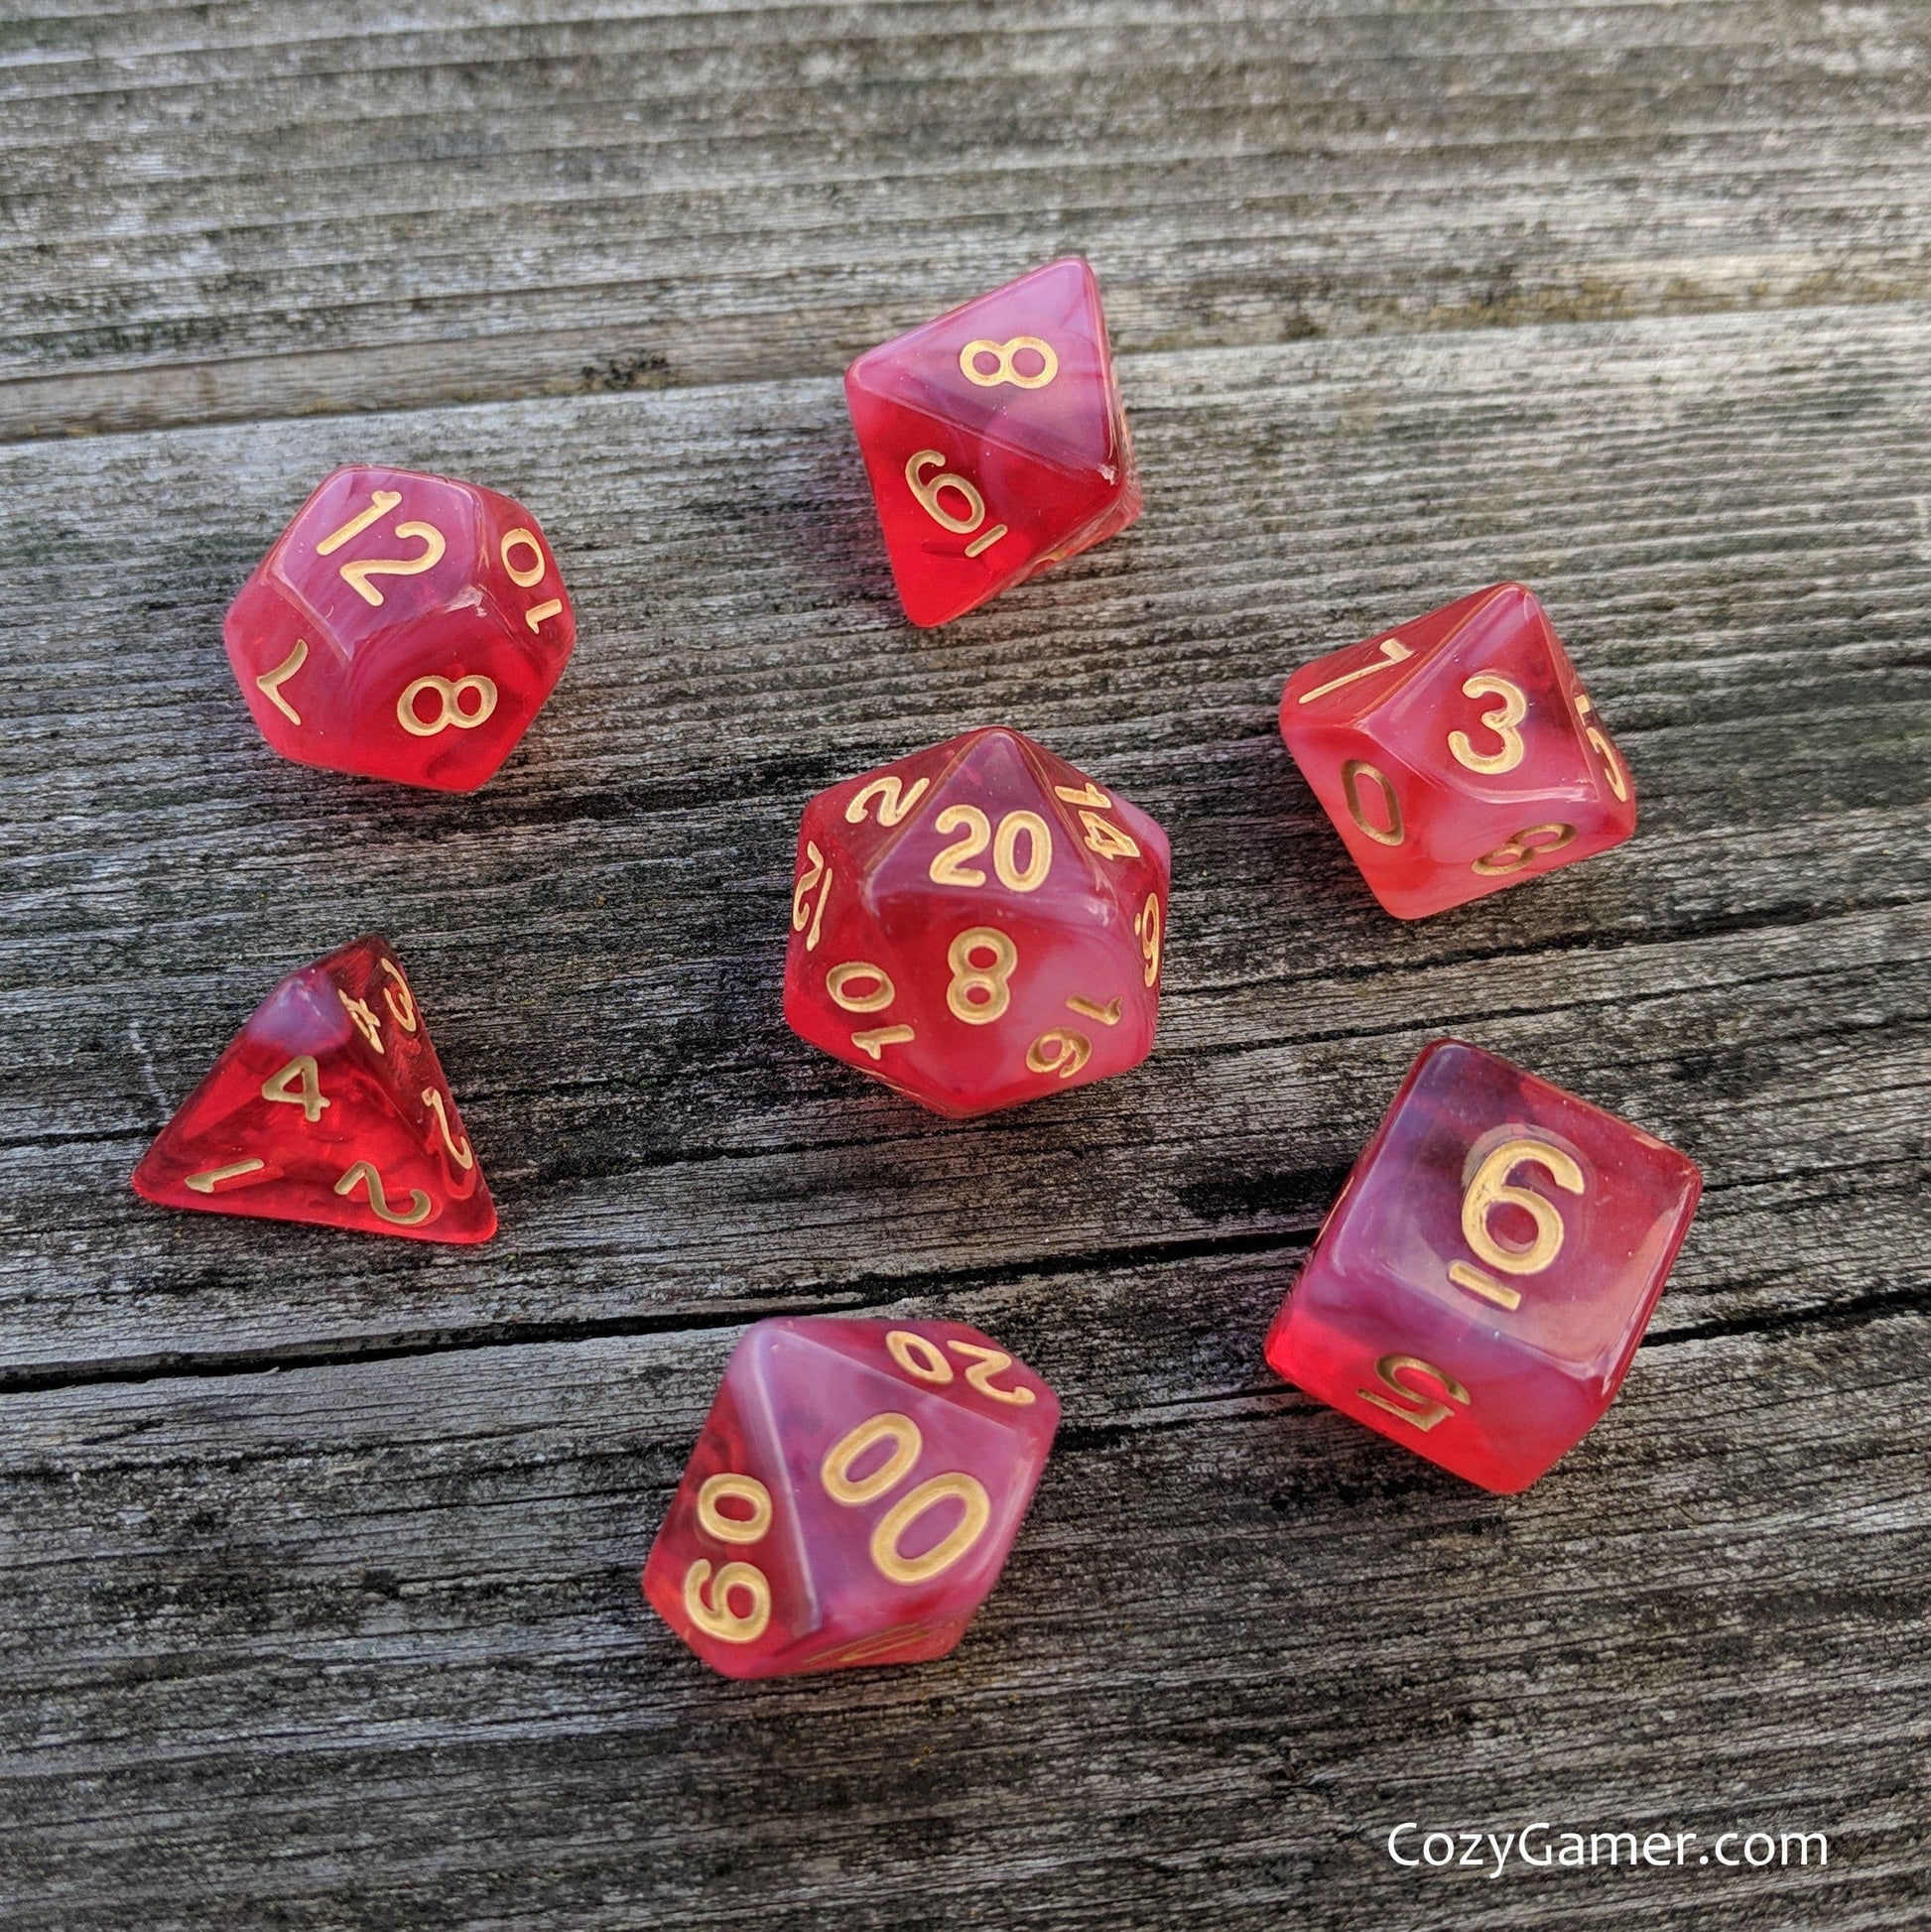 White Blood Cells DnD Dice Set, Bright Red Dice - CozyGamer